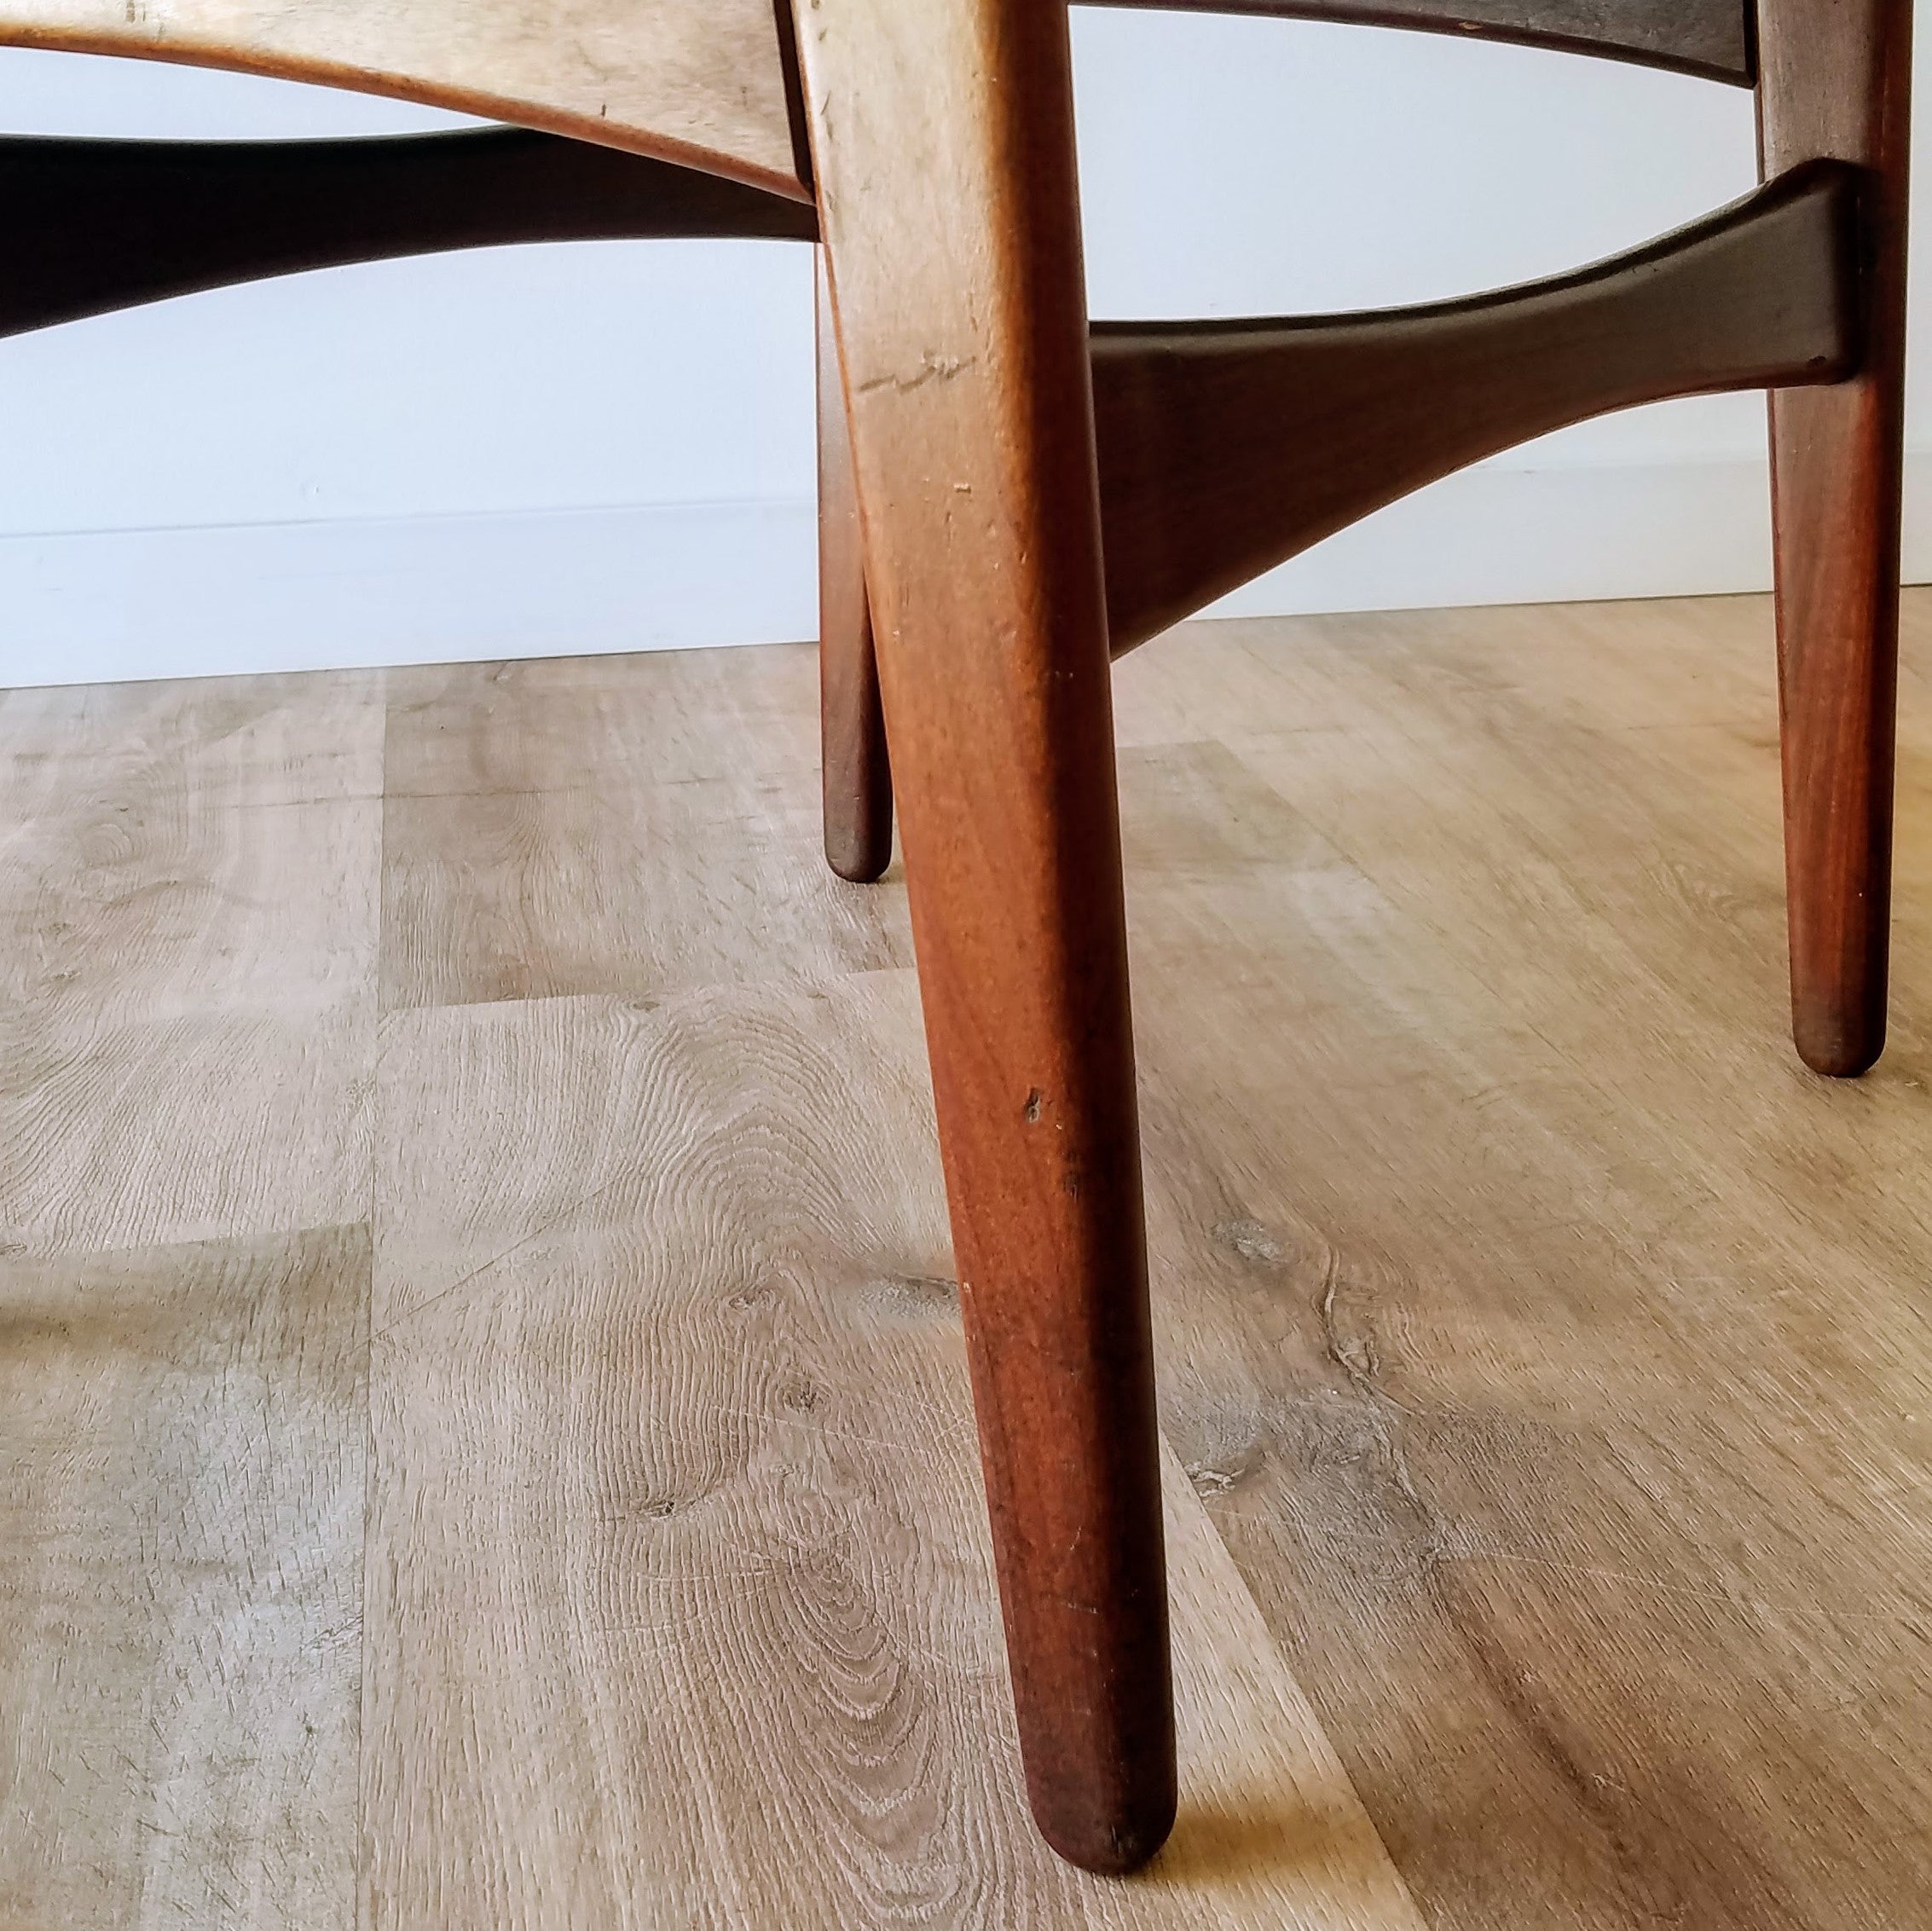 Poul Volther Dining Chairs